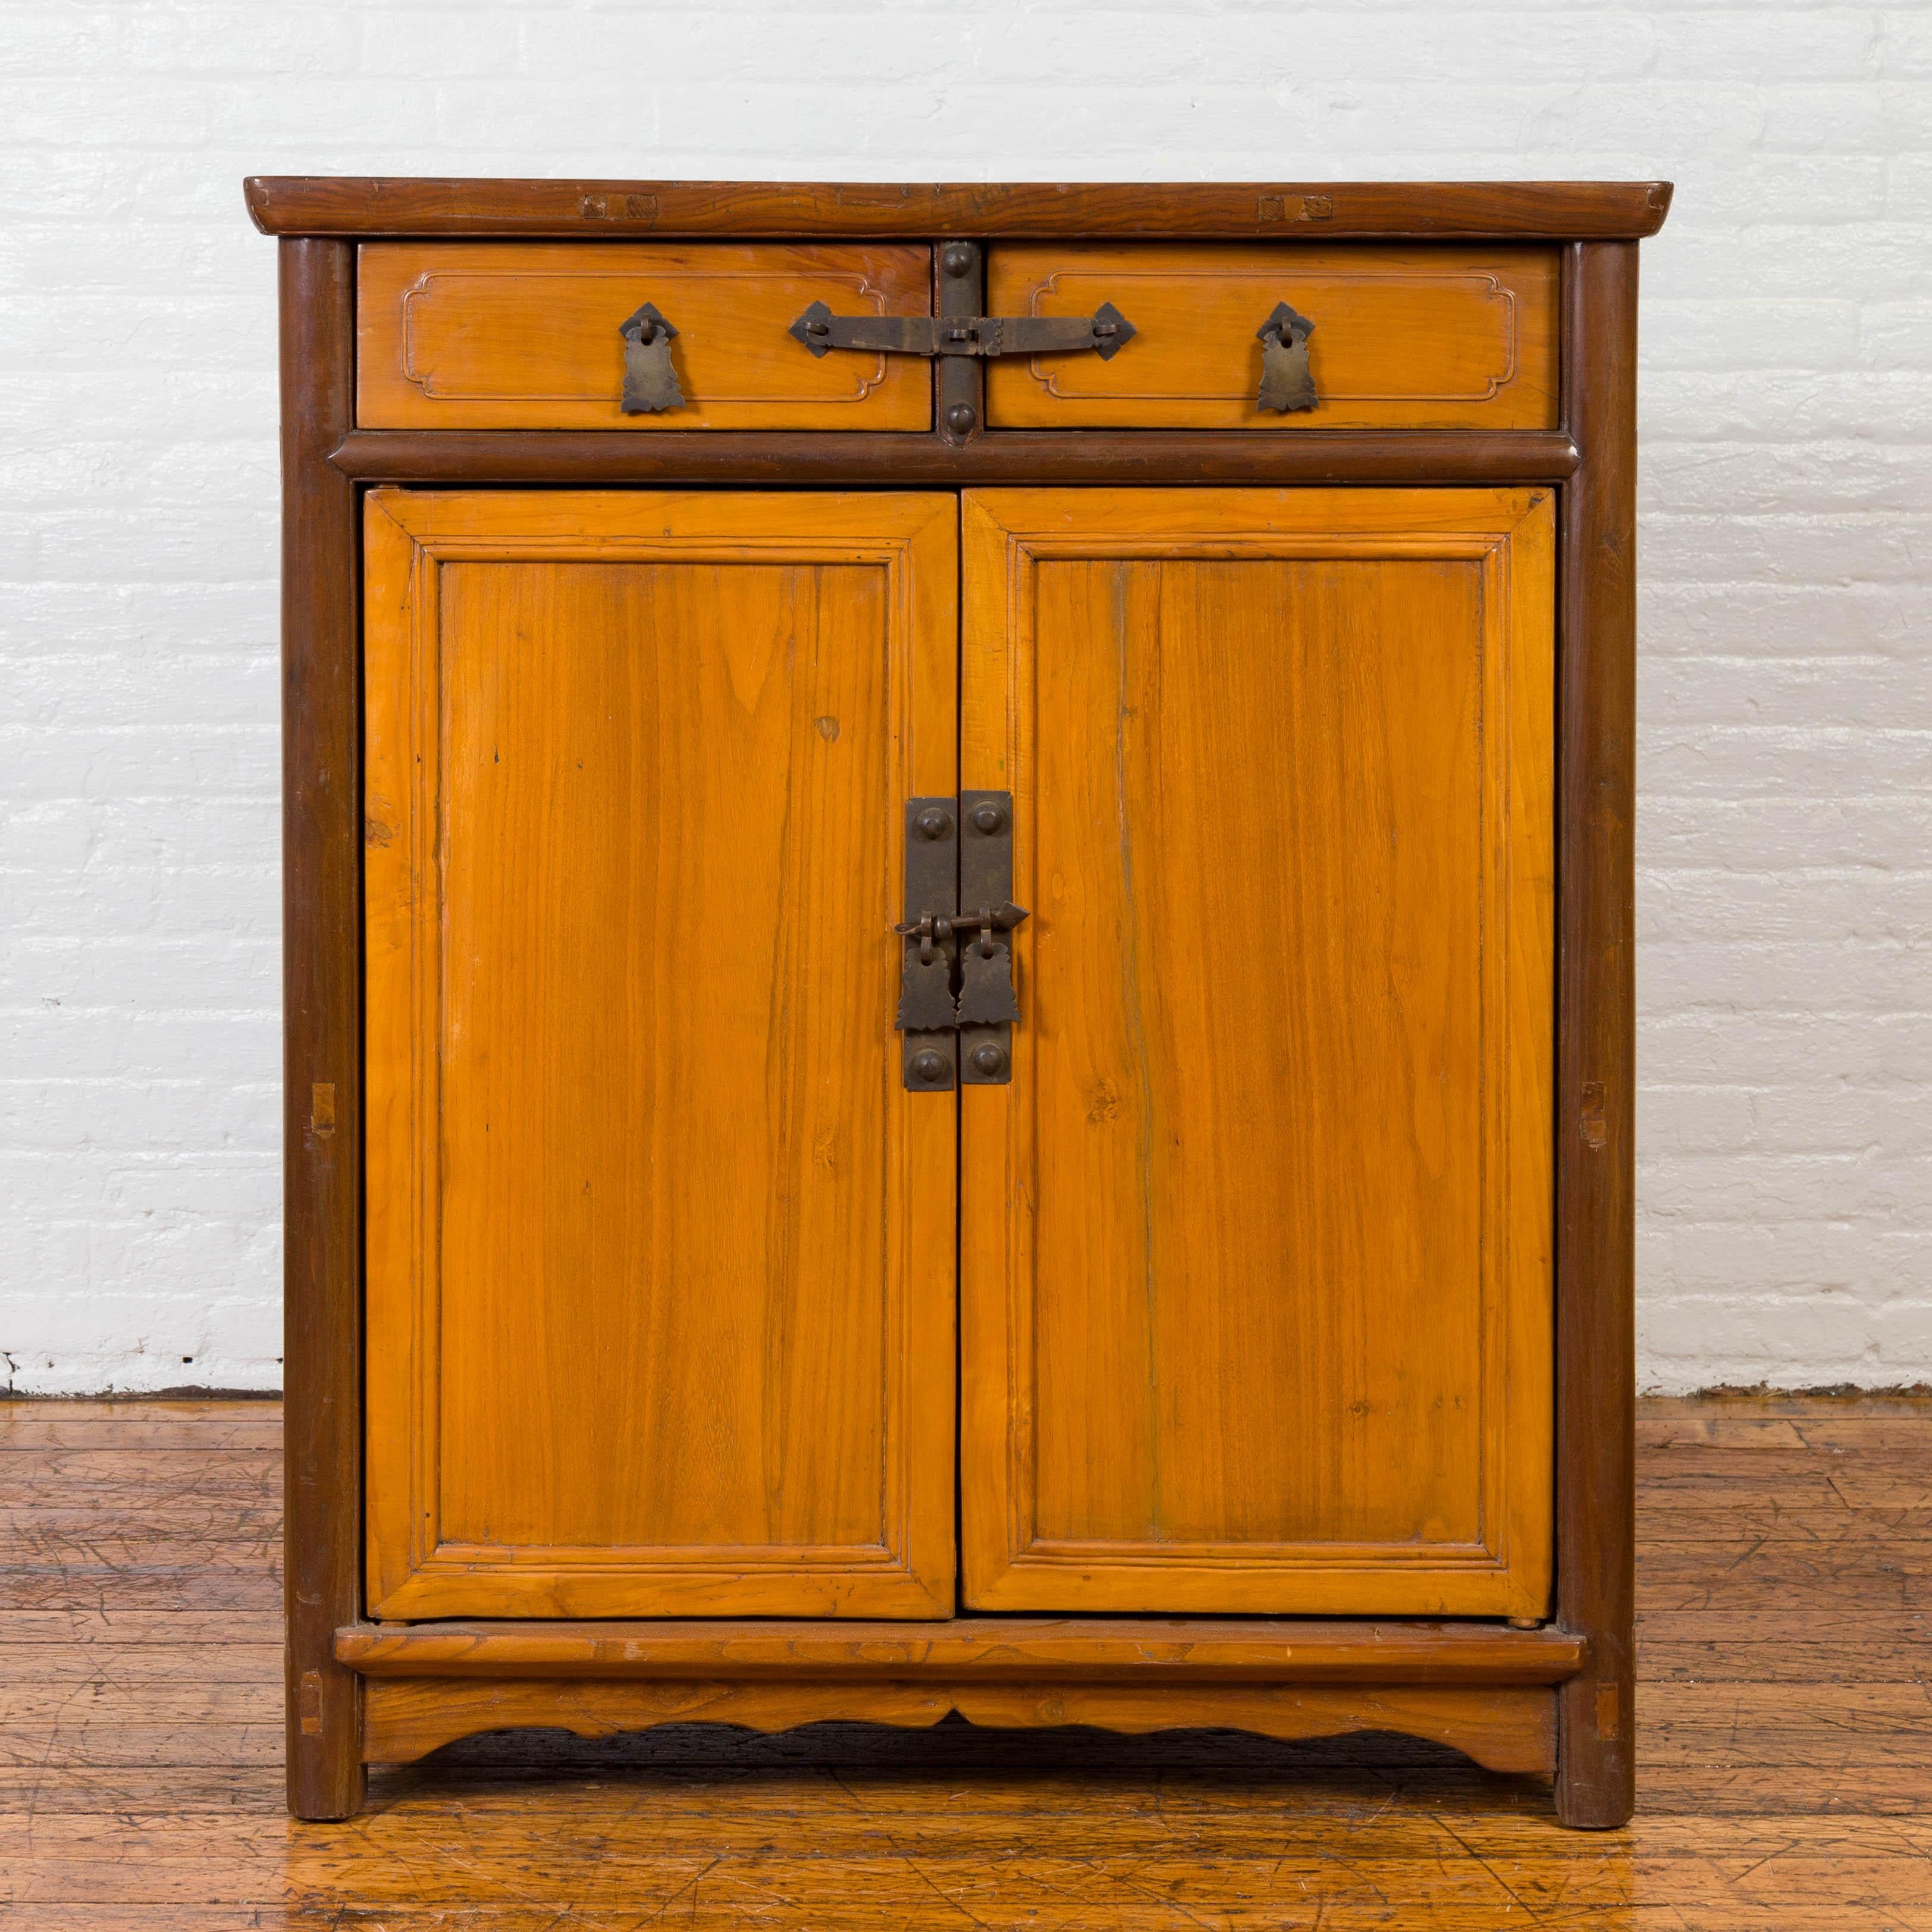 An antique Chinese elmwood two-toned cabinet from the early 20th century, with cut bronze hardware and brushed yellow hued patina. Attracting our attention with its clean lines and two-toned finish, this Chinese elm cabinet features a rectangular